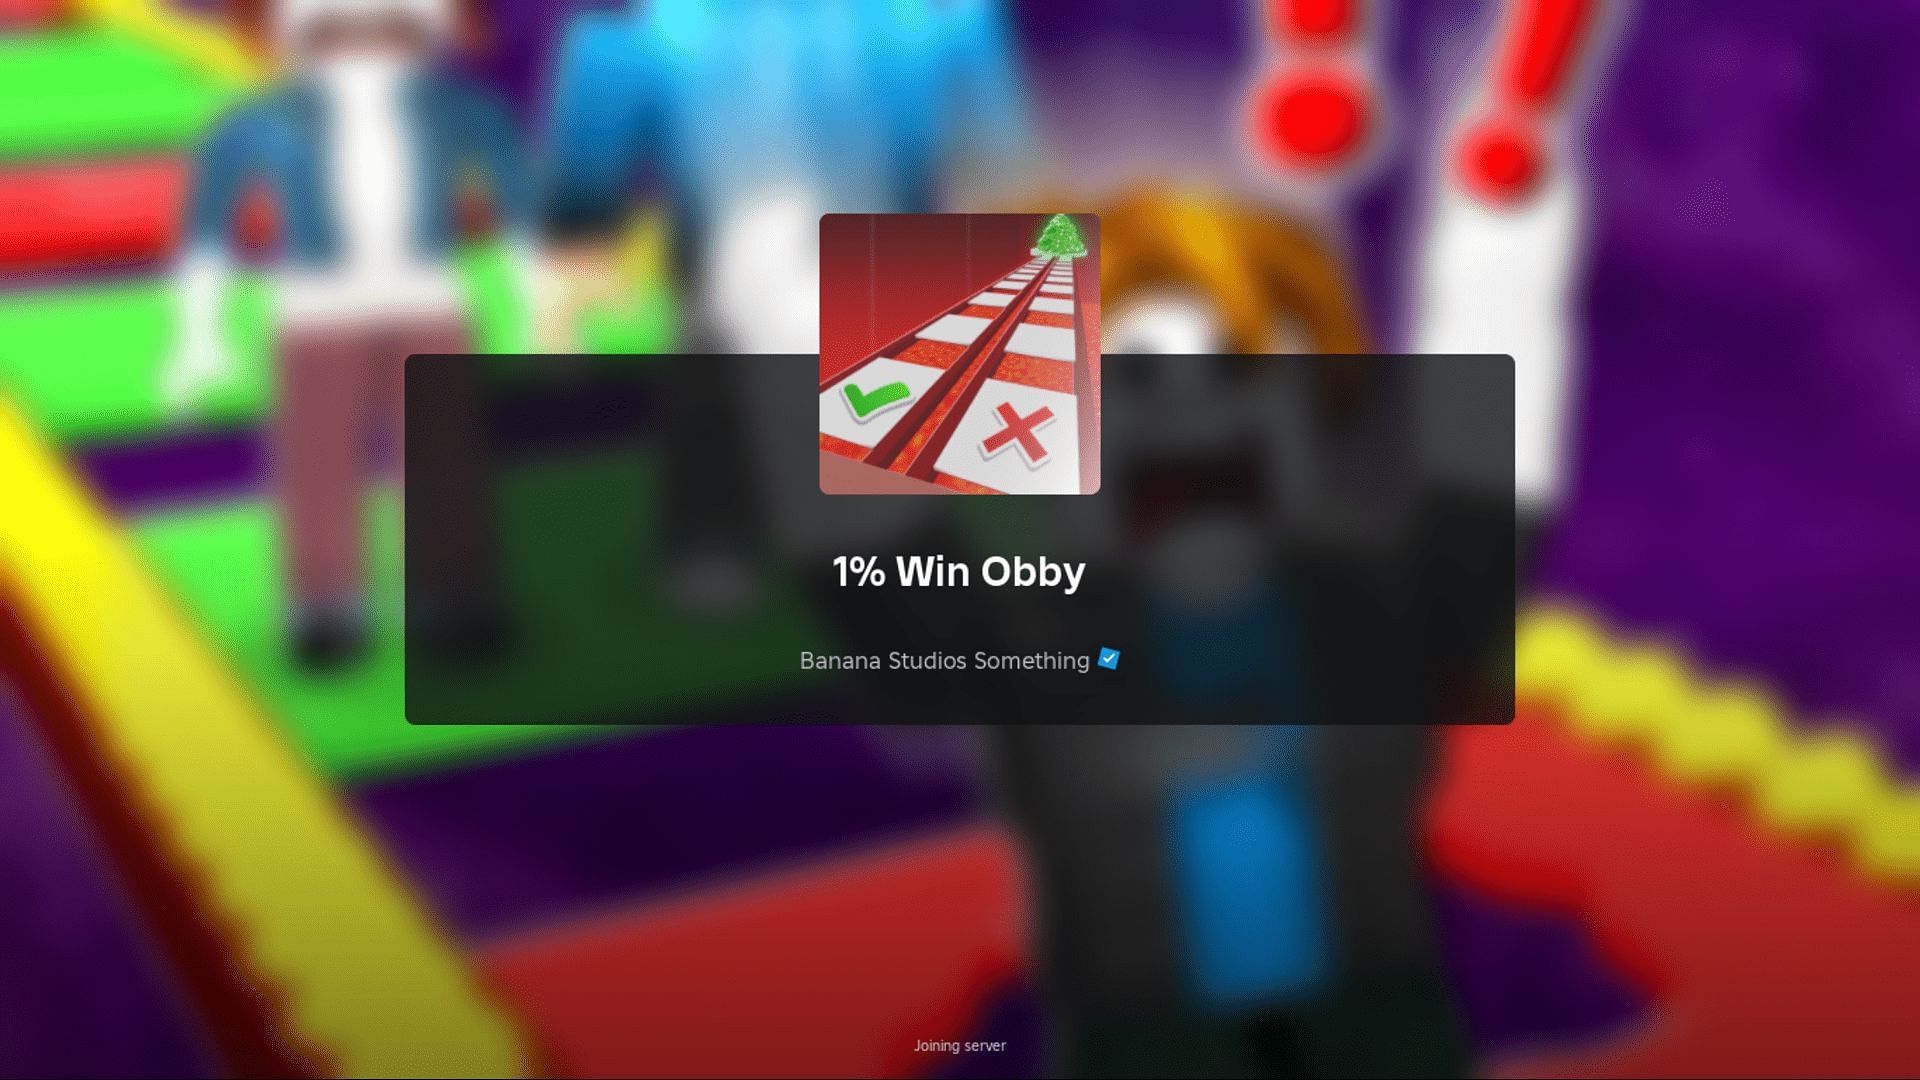 1% Win Obby codes